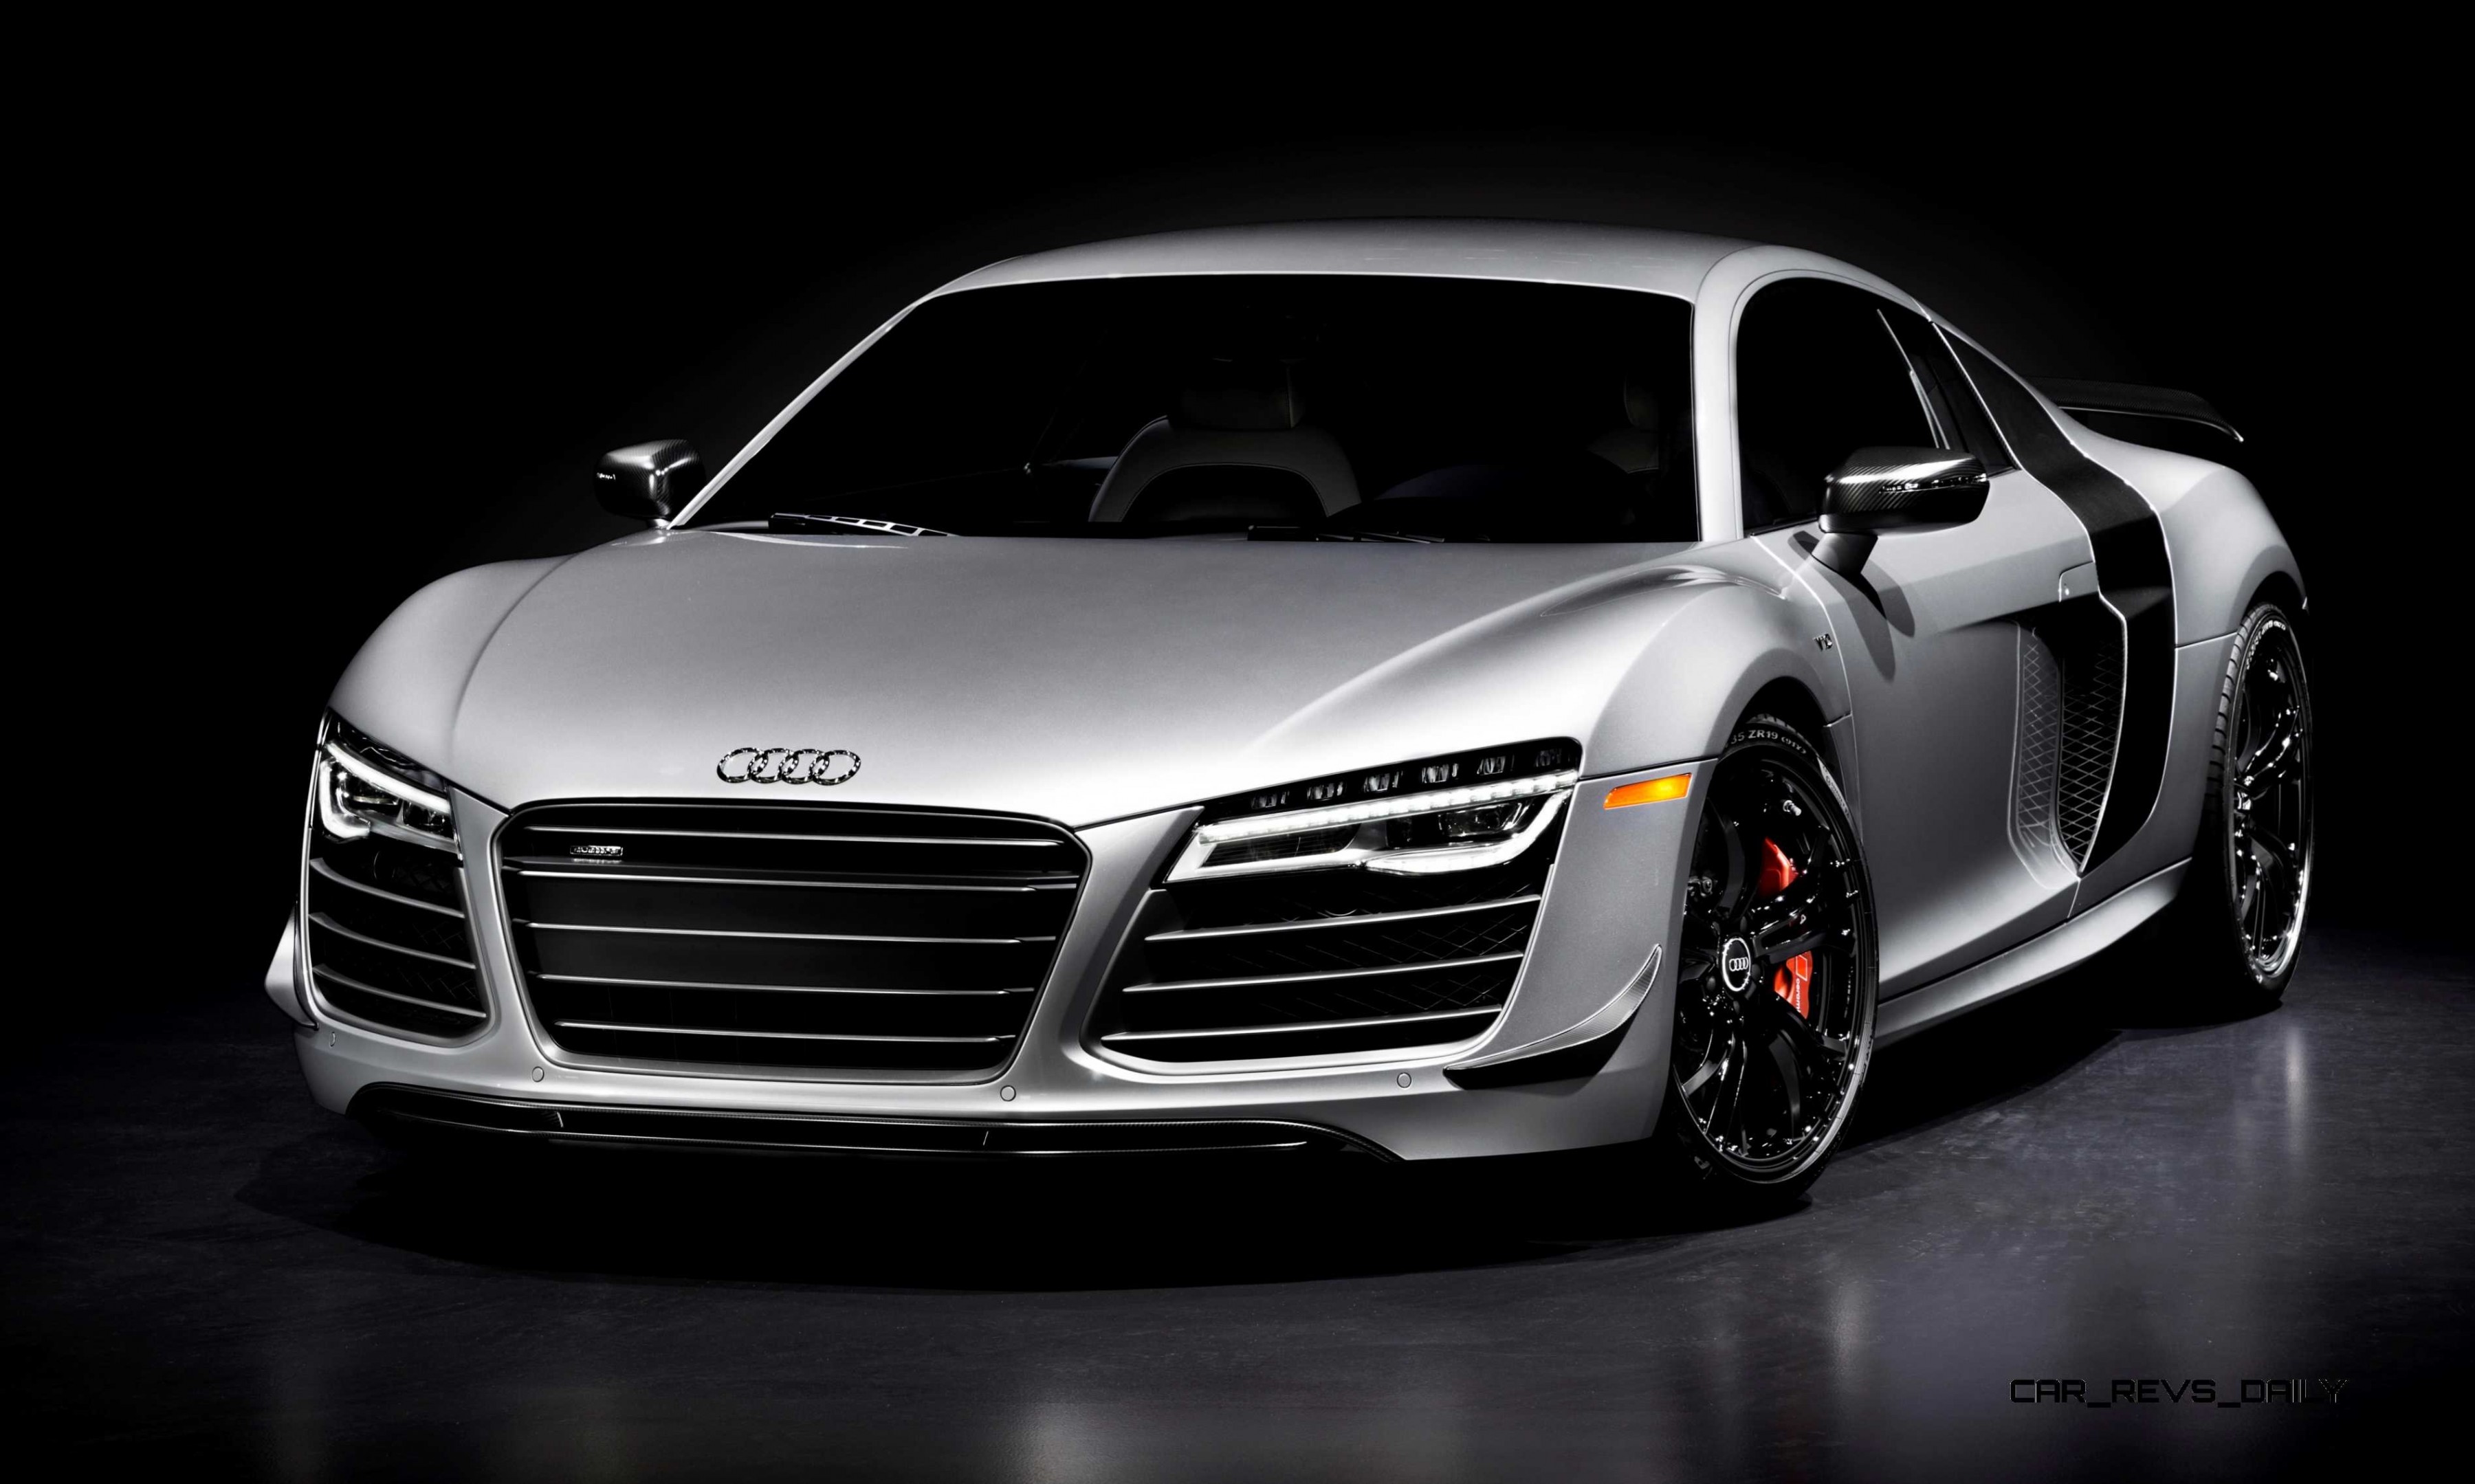 3.2s, 199MPH 2015 Audi R8 Competition Edition Revealed Ahead of LA Show